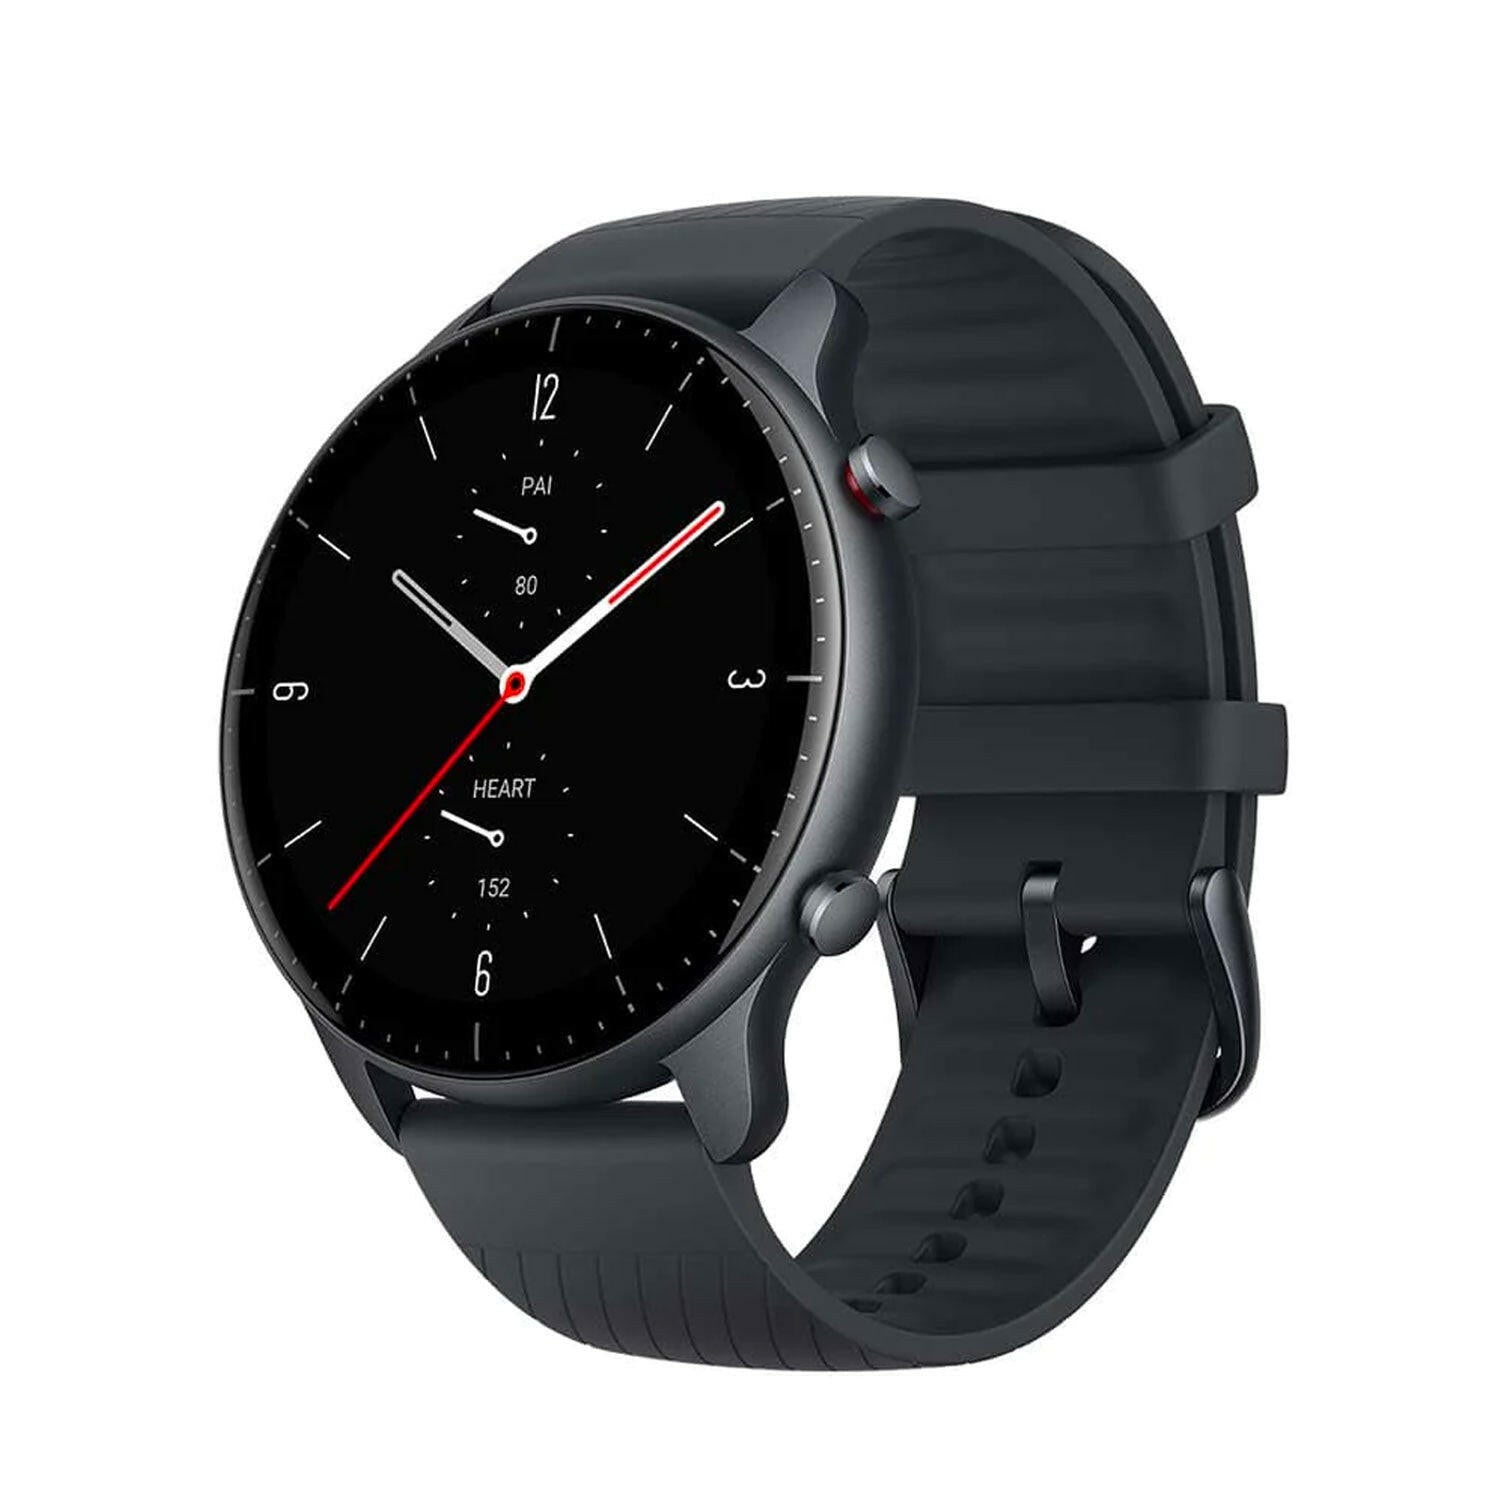 Version　GTR　Store　Amazfit　Buy　Credits.　New　Official　₹4,499.00　Smart　Watch　Store　Amazfit　15%